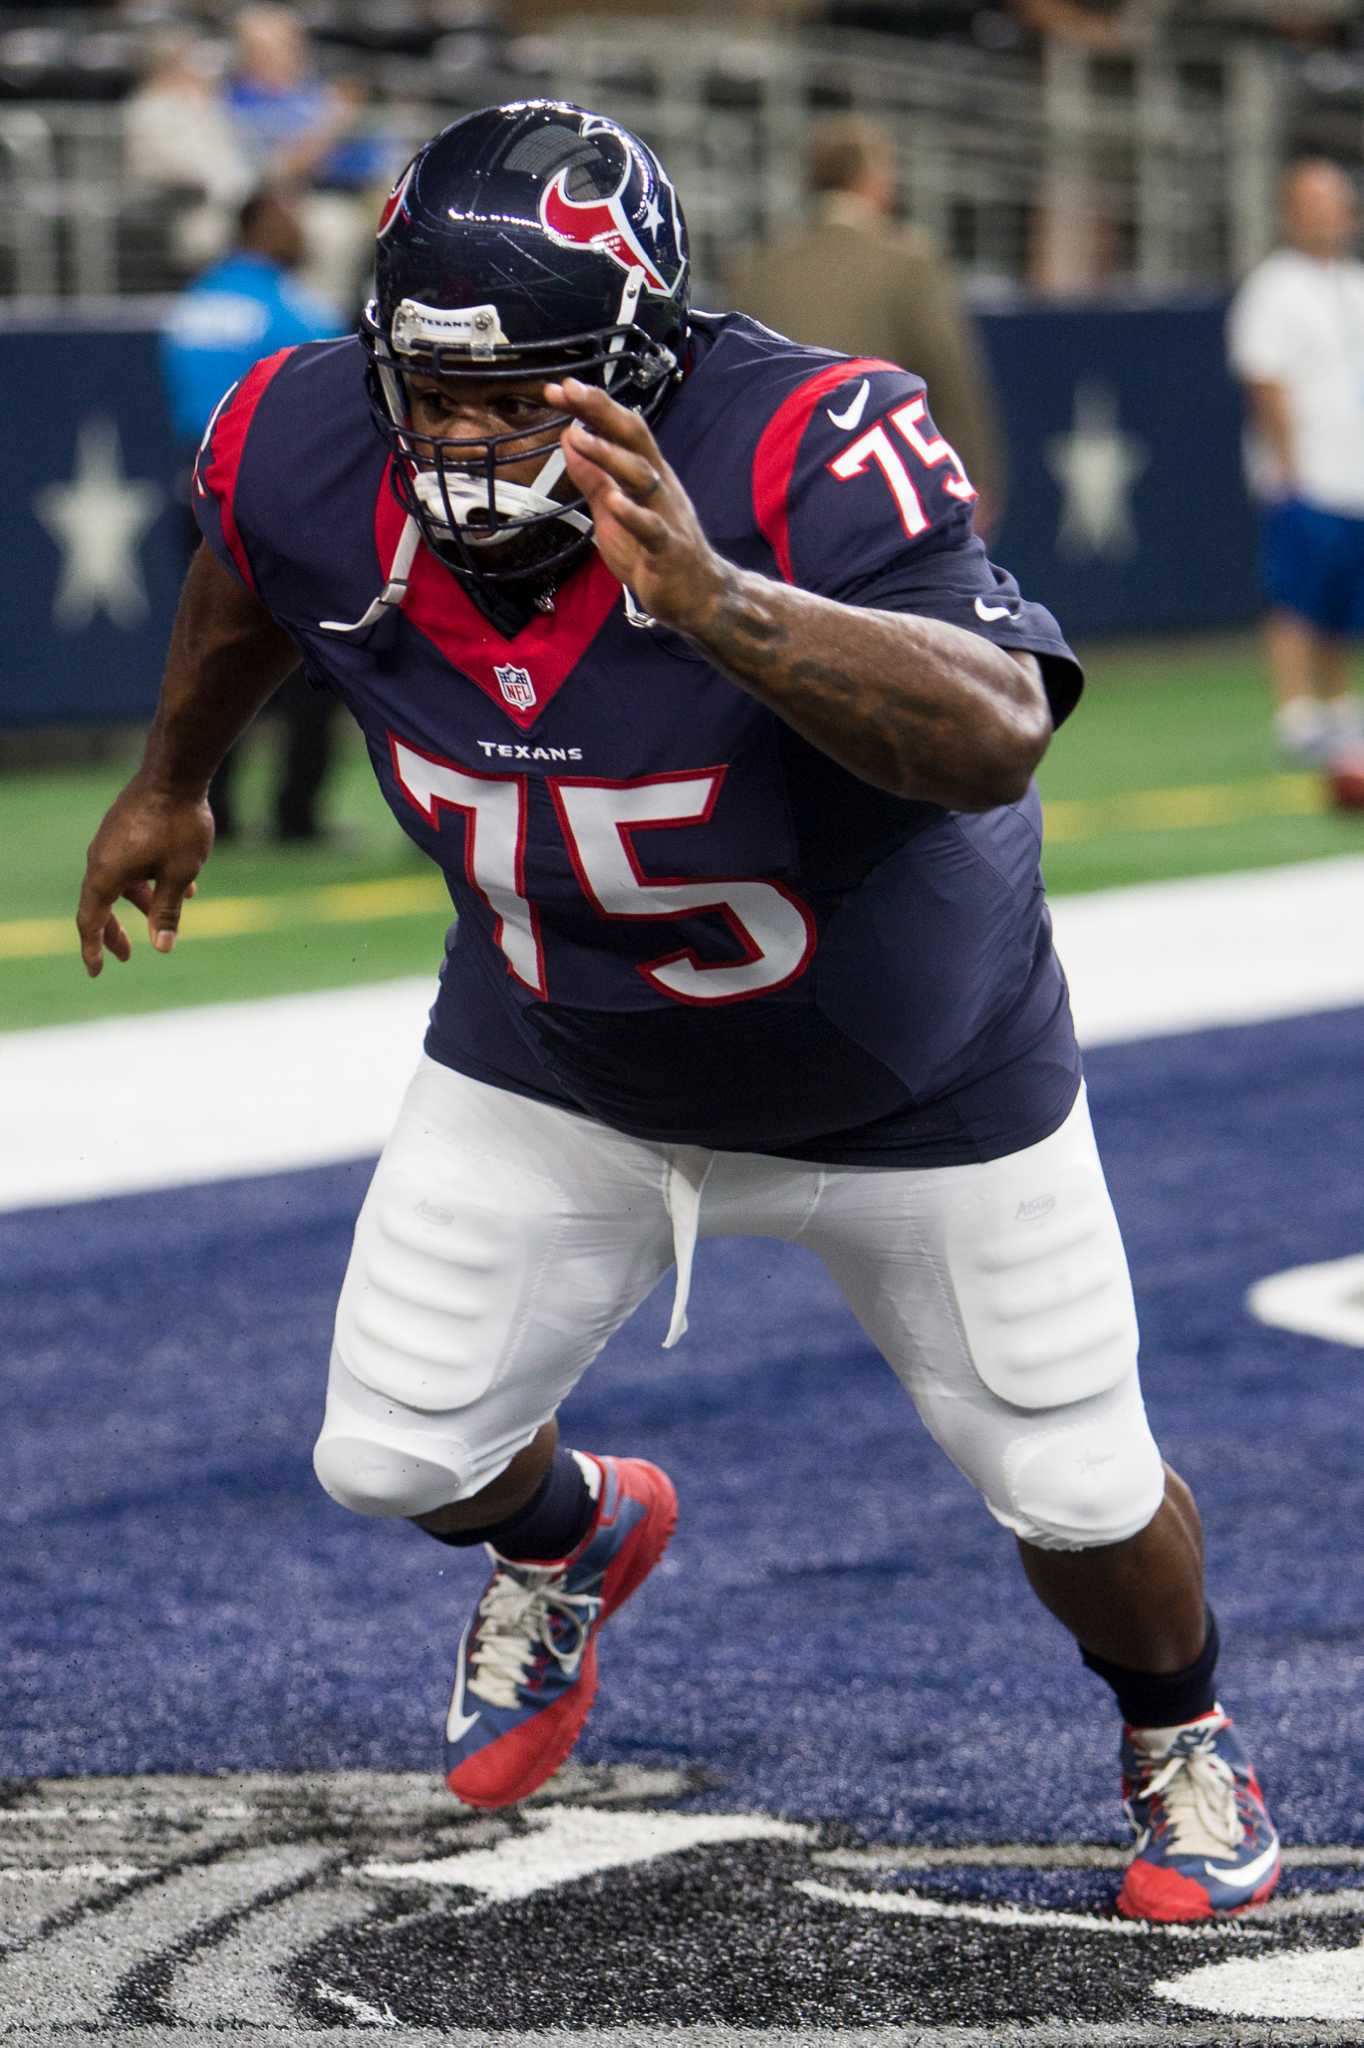 Nose tackle Vince Wilfork joins Texans after being let go by